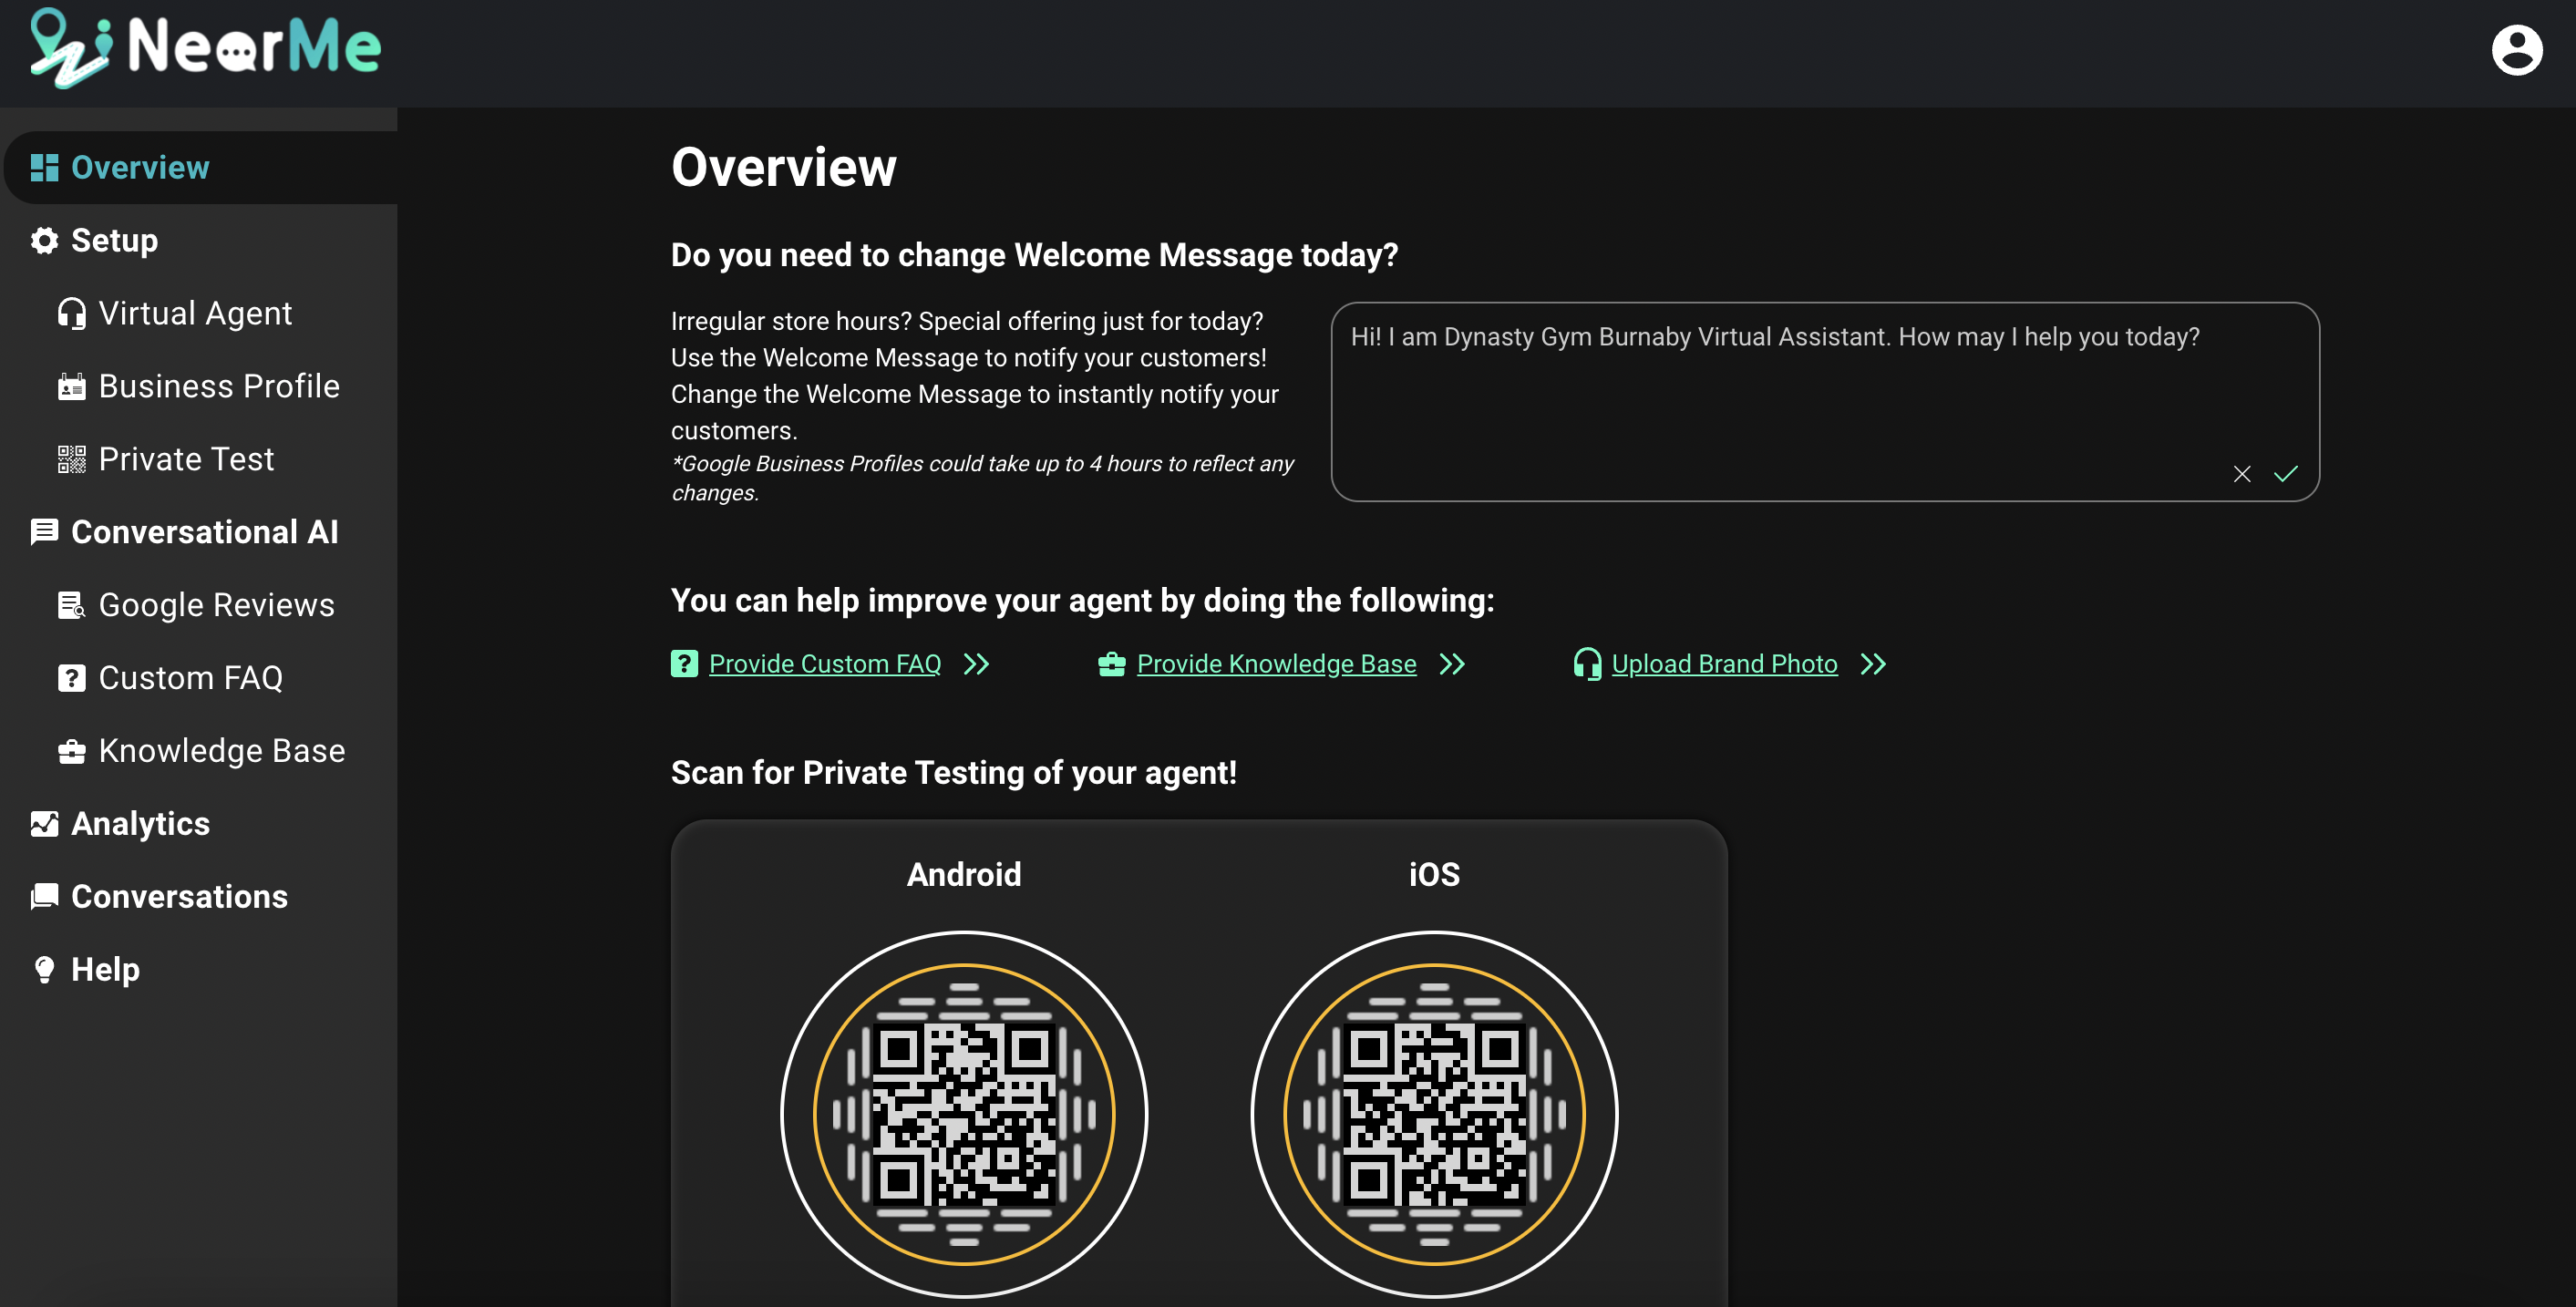 The interface of Near Me Messaging Overview page where business owners can modify the welcome message and improve their virtual agent